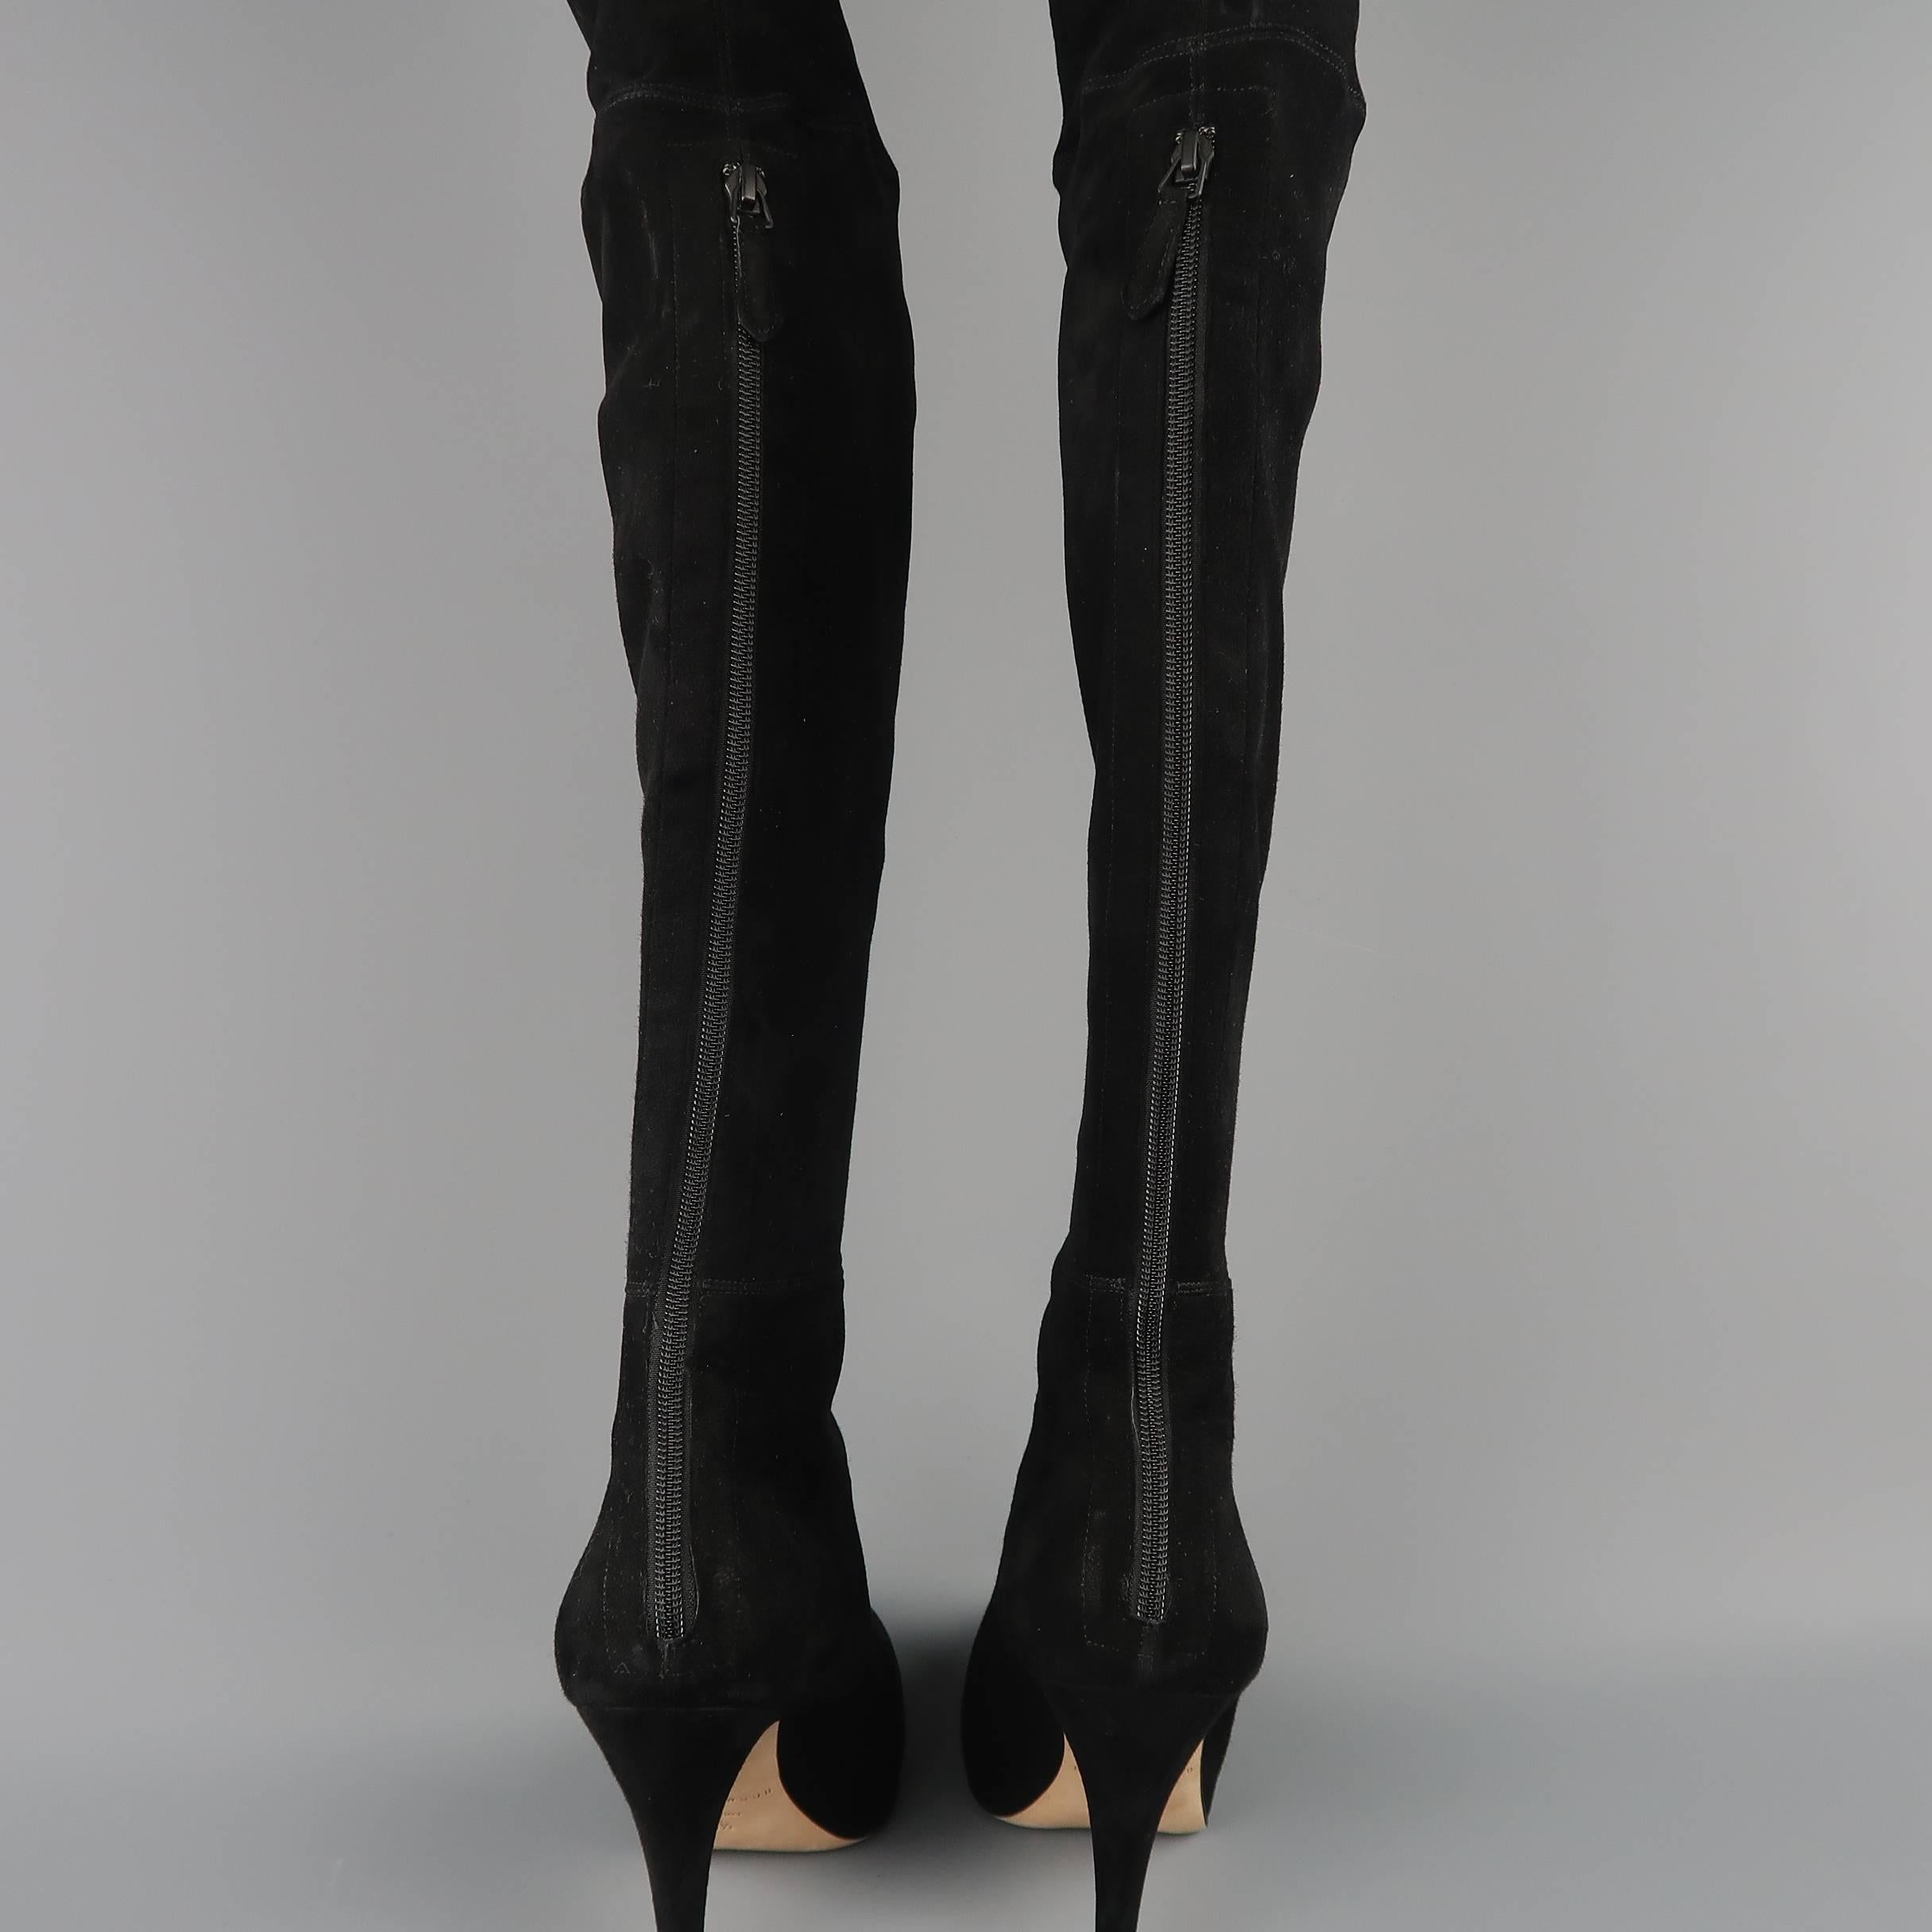 BRIAN ATWOOD Size 8.5 Black Suede Thigh High Platform Boots 3